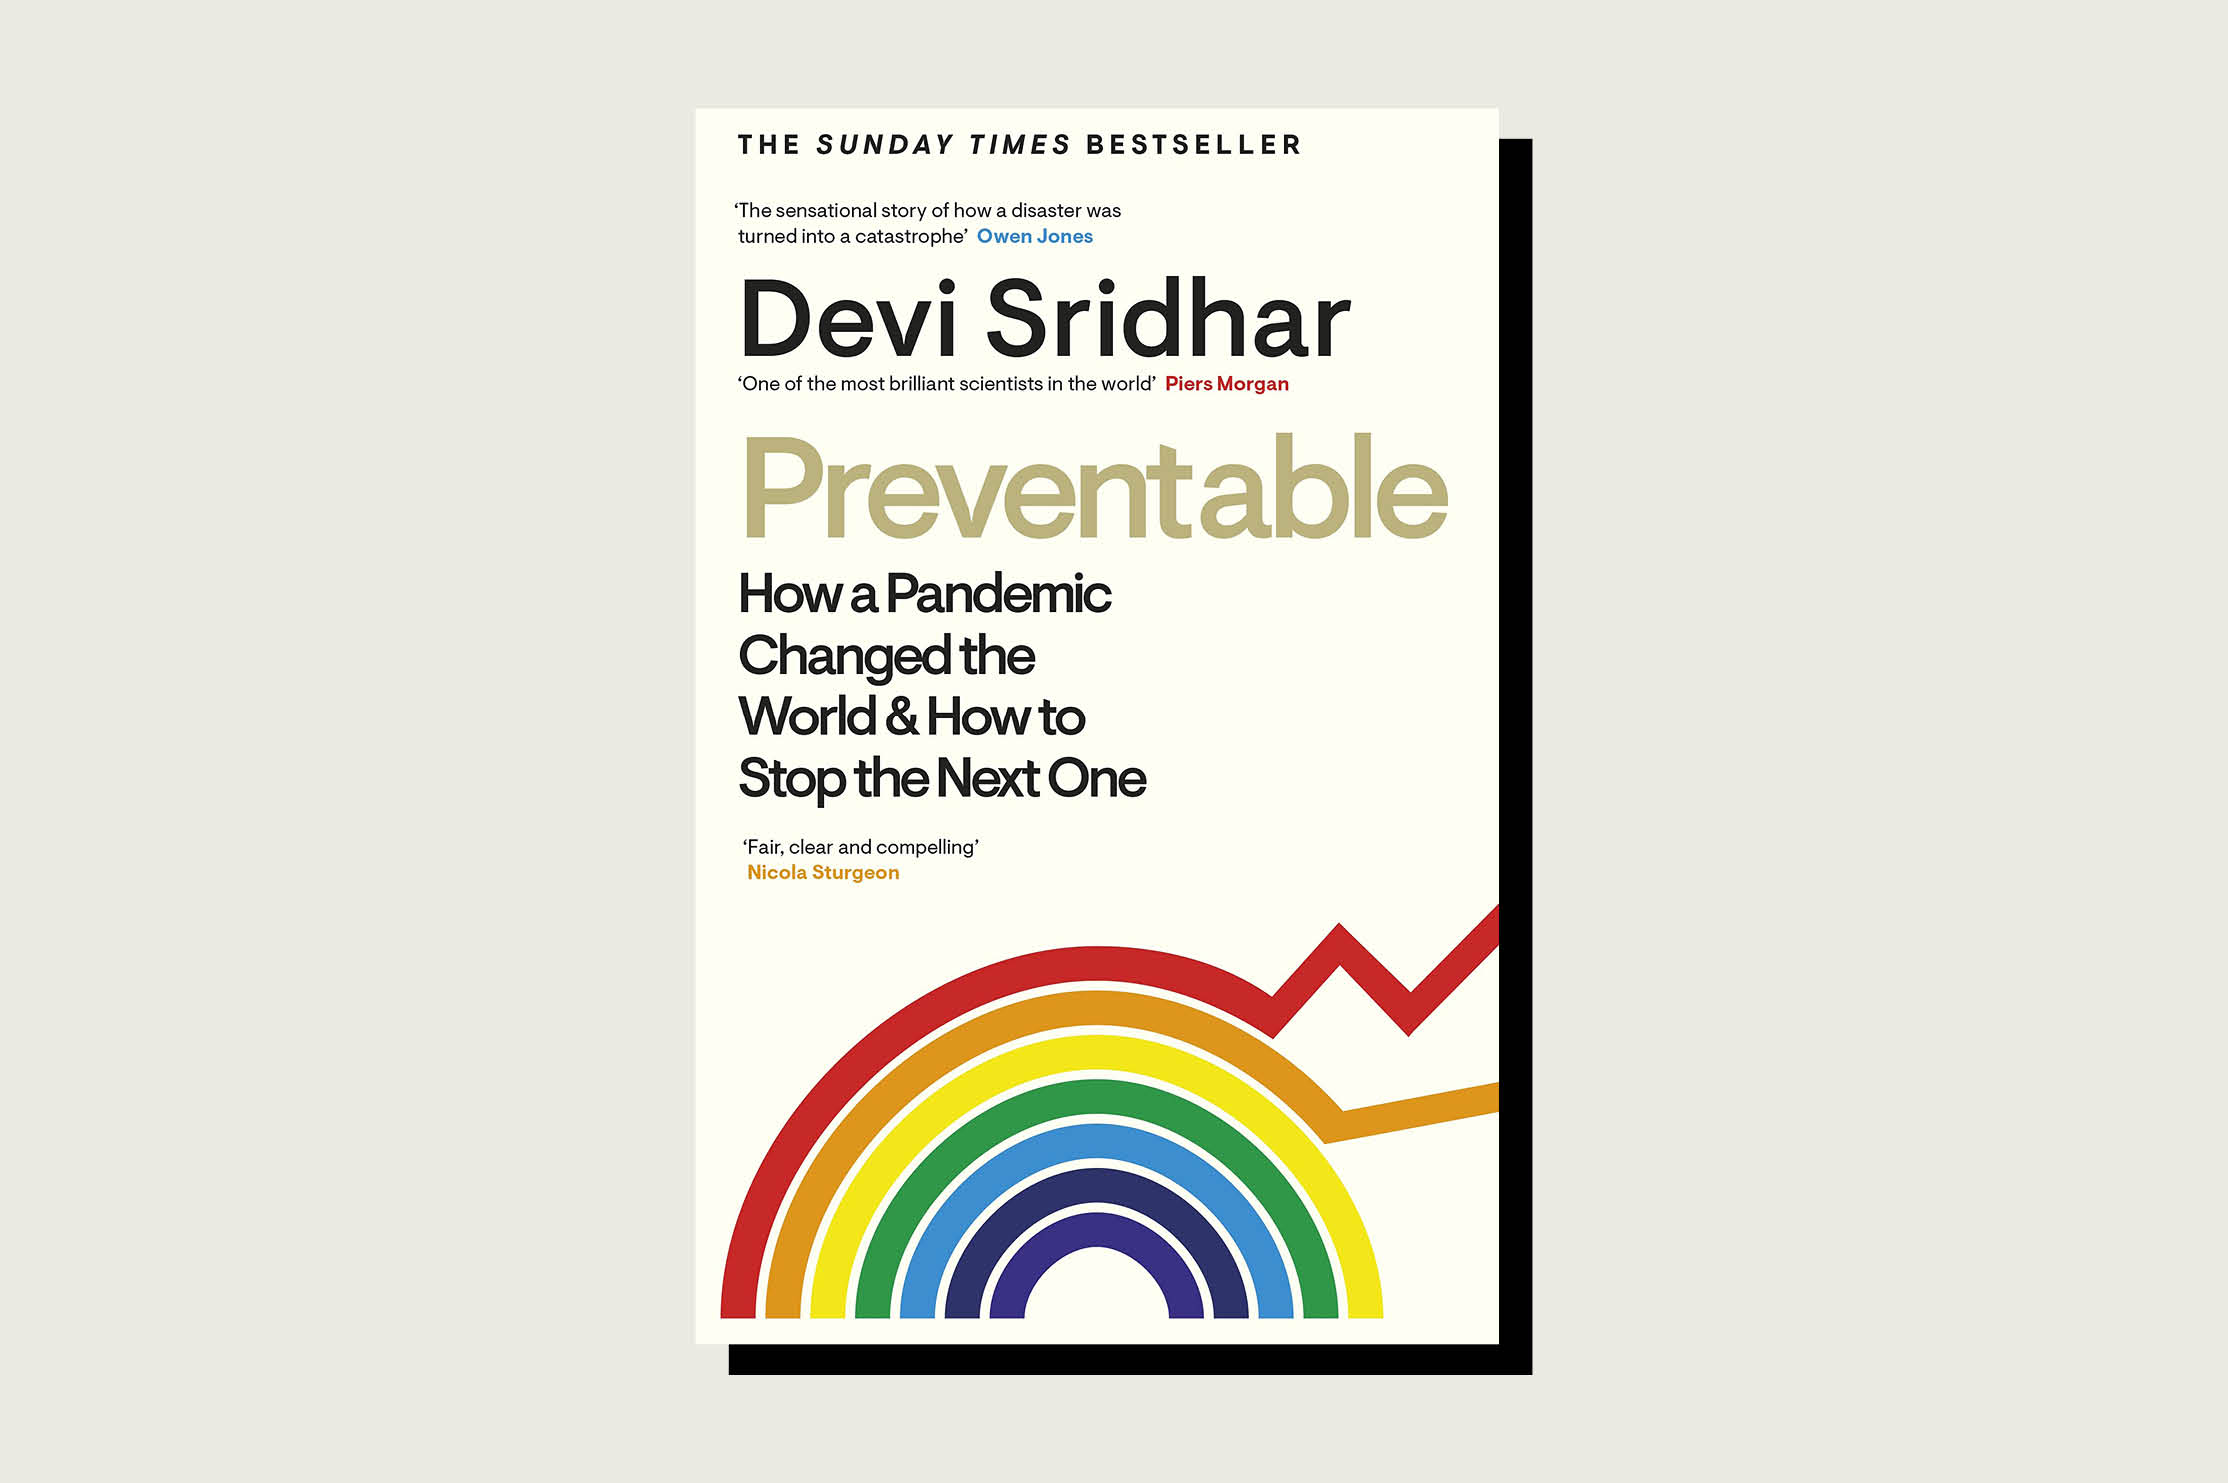 Preventable: How a Pandemic Changed the World & How to Stop the Next One, Devi Sridhar, Viking, 432 pp., .95, July 2022